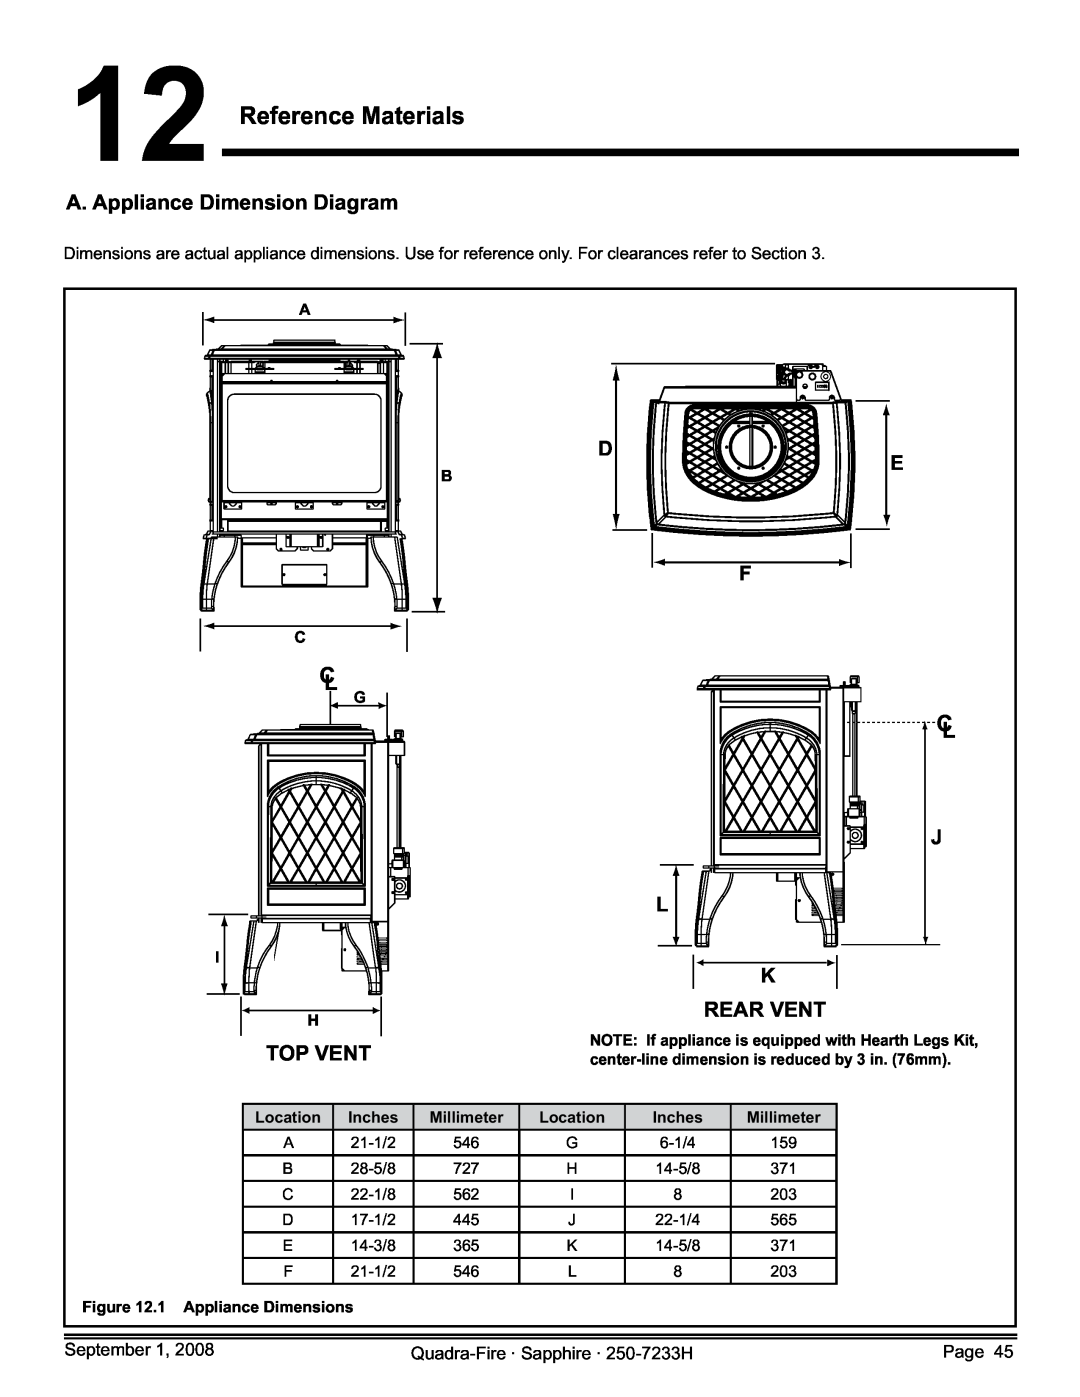 Hearth and Home Technologies 839-1390 Reference Materials, A. Appliance Dimension Diagram, Top Vent, Rear Vent, J L K 